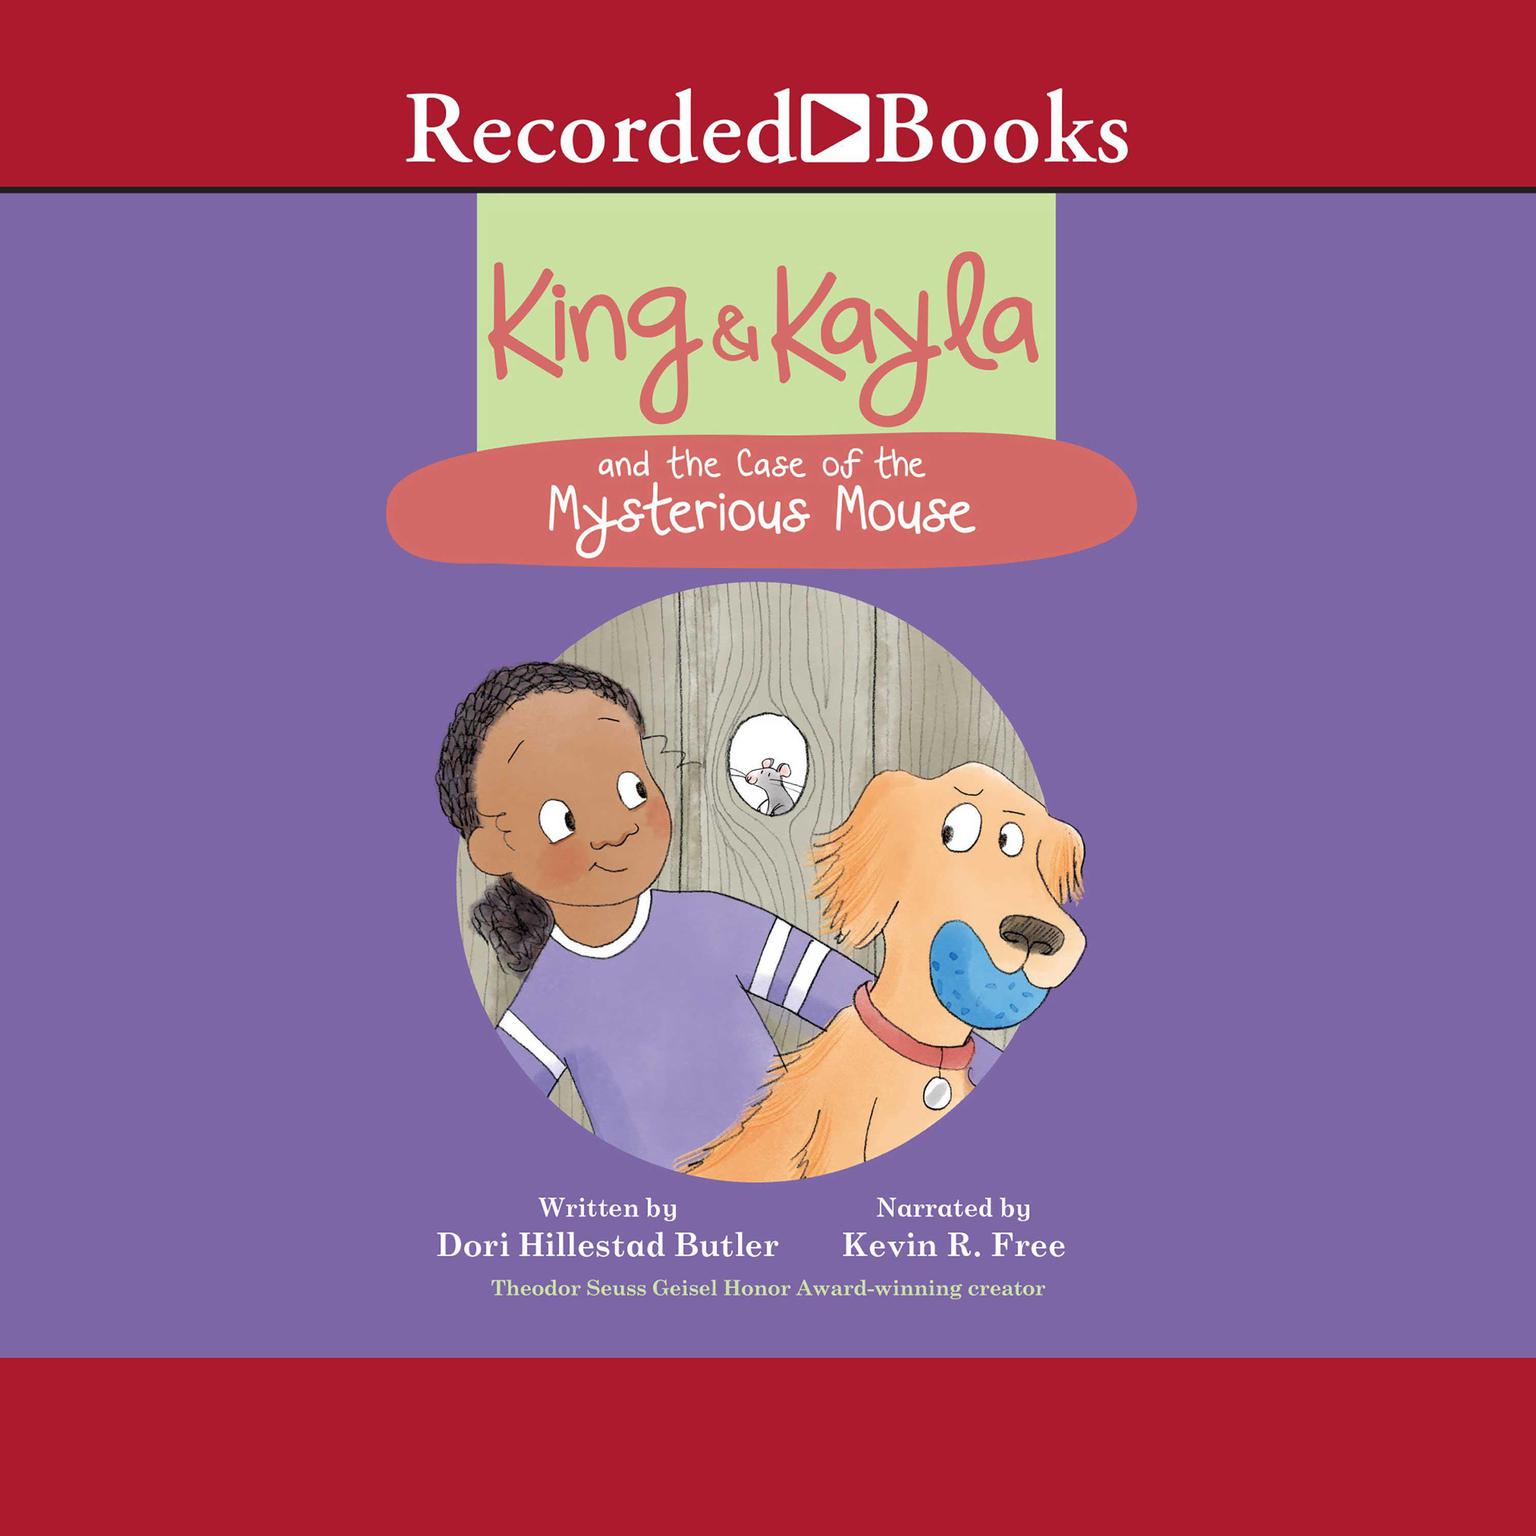 King & Kayla and the Case of the Mysterious Mouse Audiobook, by Dori Hillestad Butler  